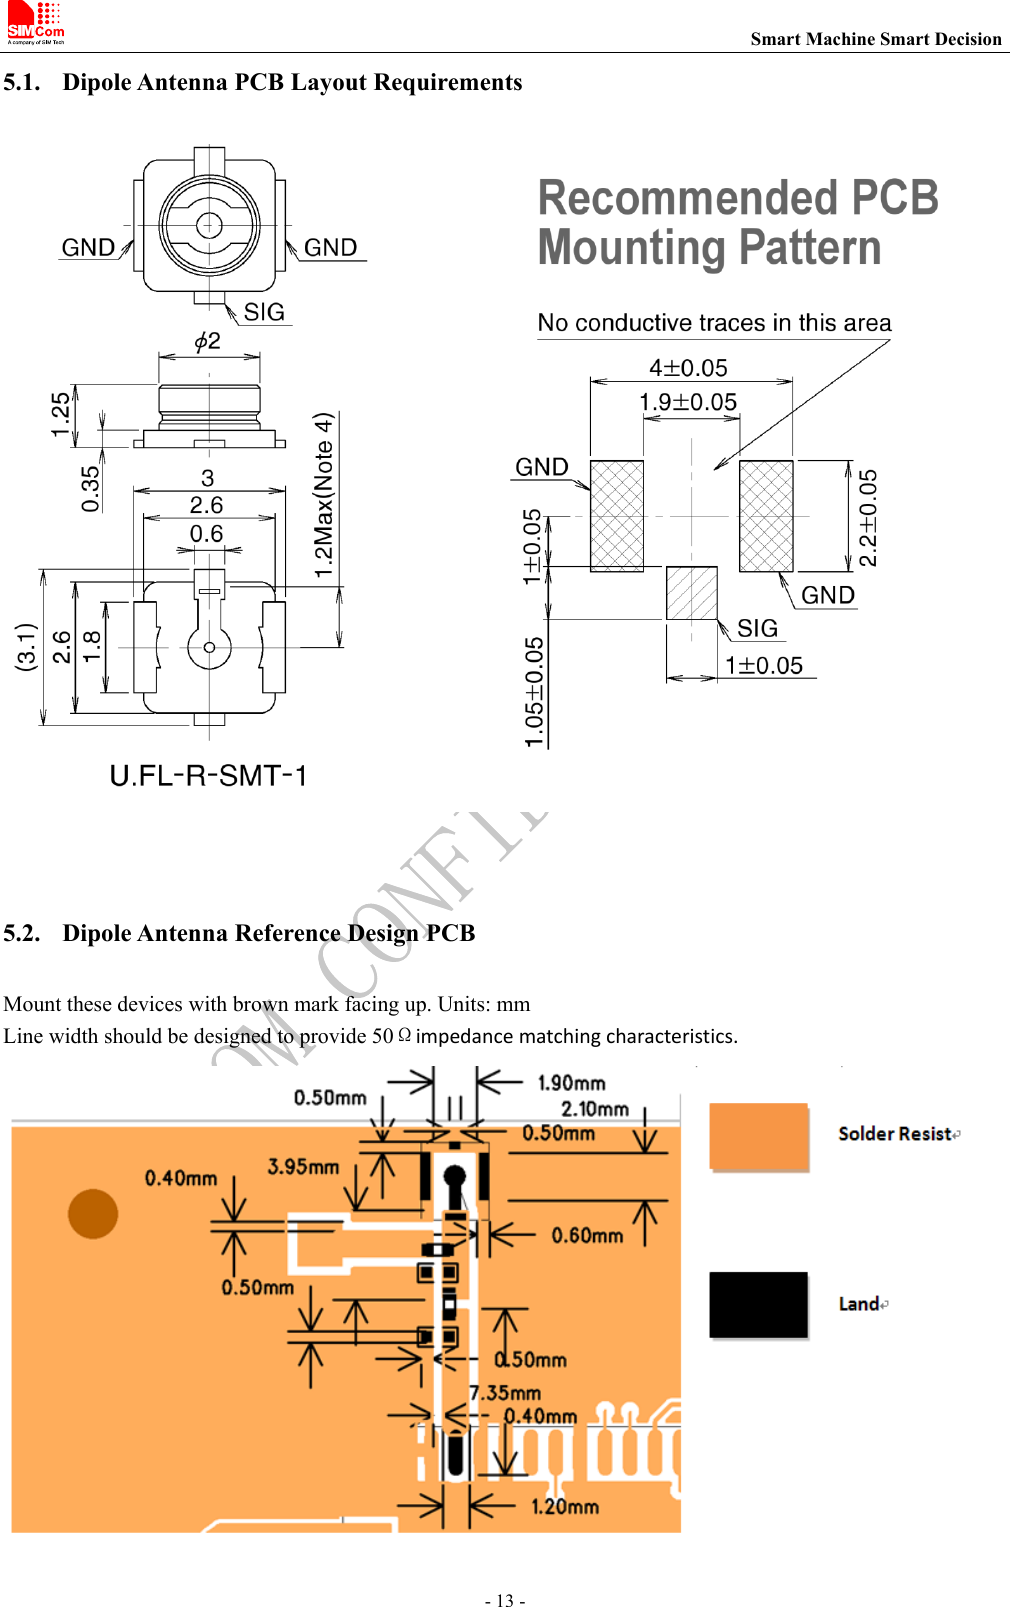                                                                          Smart Machine Smart Decision - 13 - 5.1. Dipole Antenna PCB Layout Requirements   5.2. Dipole Antenna Reference Design PCB Mount these devices with brown mark facing up. Units: mm Line width should be designed to provide 50Ωimpedancematchingcharacteristics.  